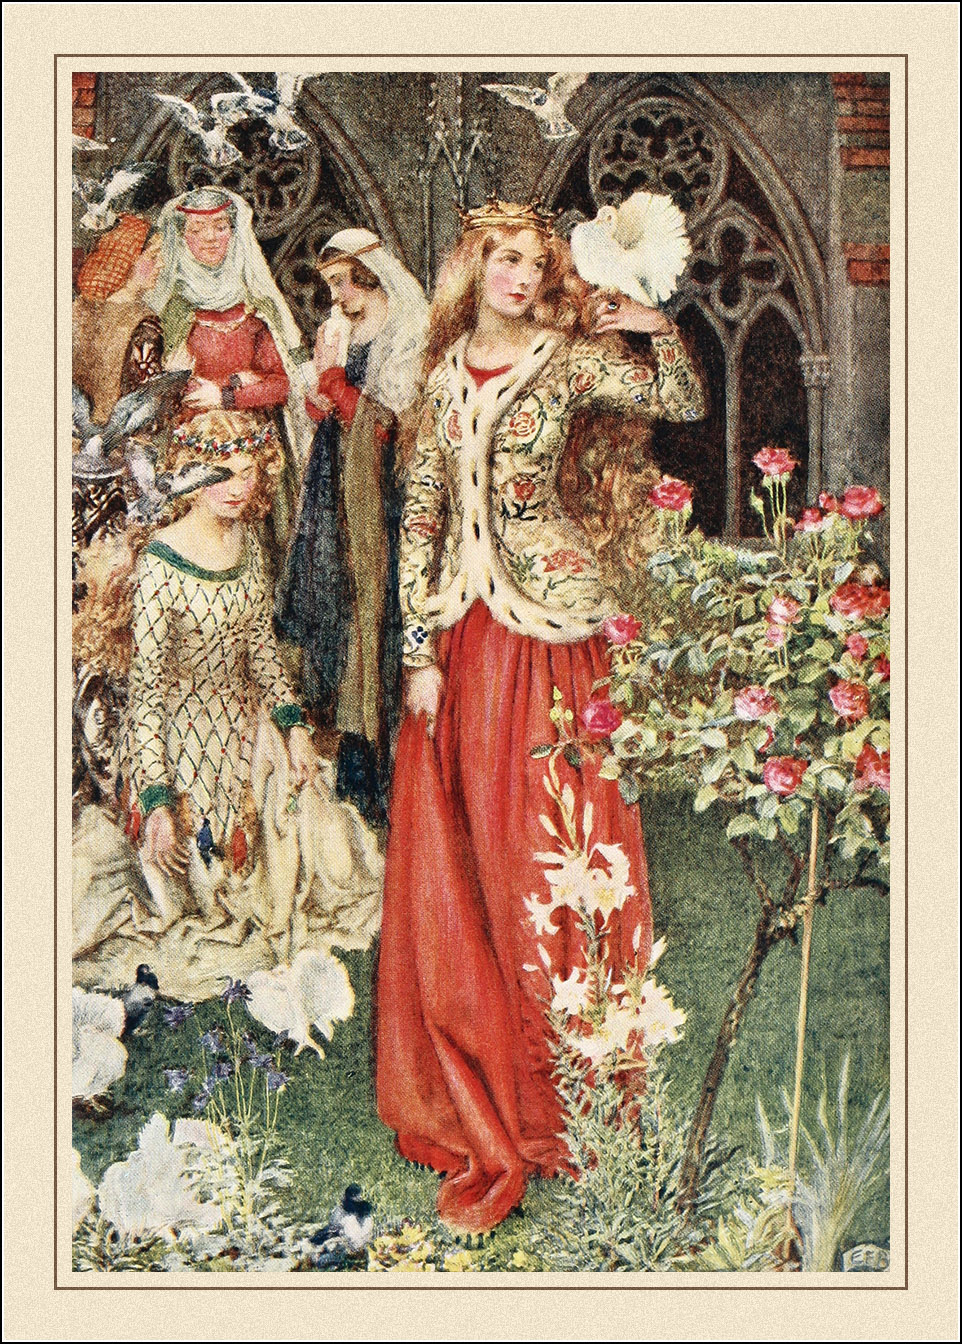 Eleanor Fortescue-Brickdale, Idylls of the King